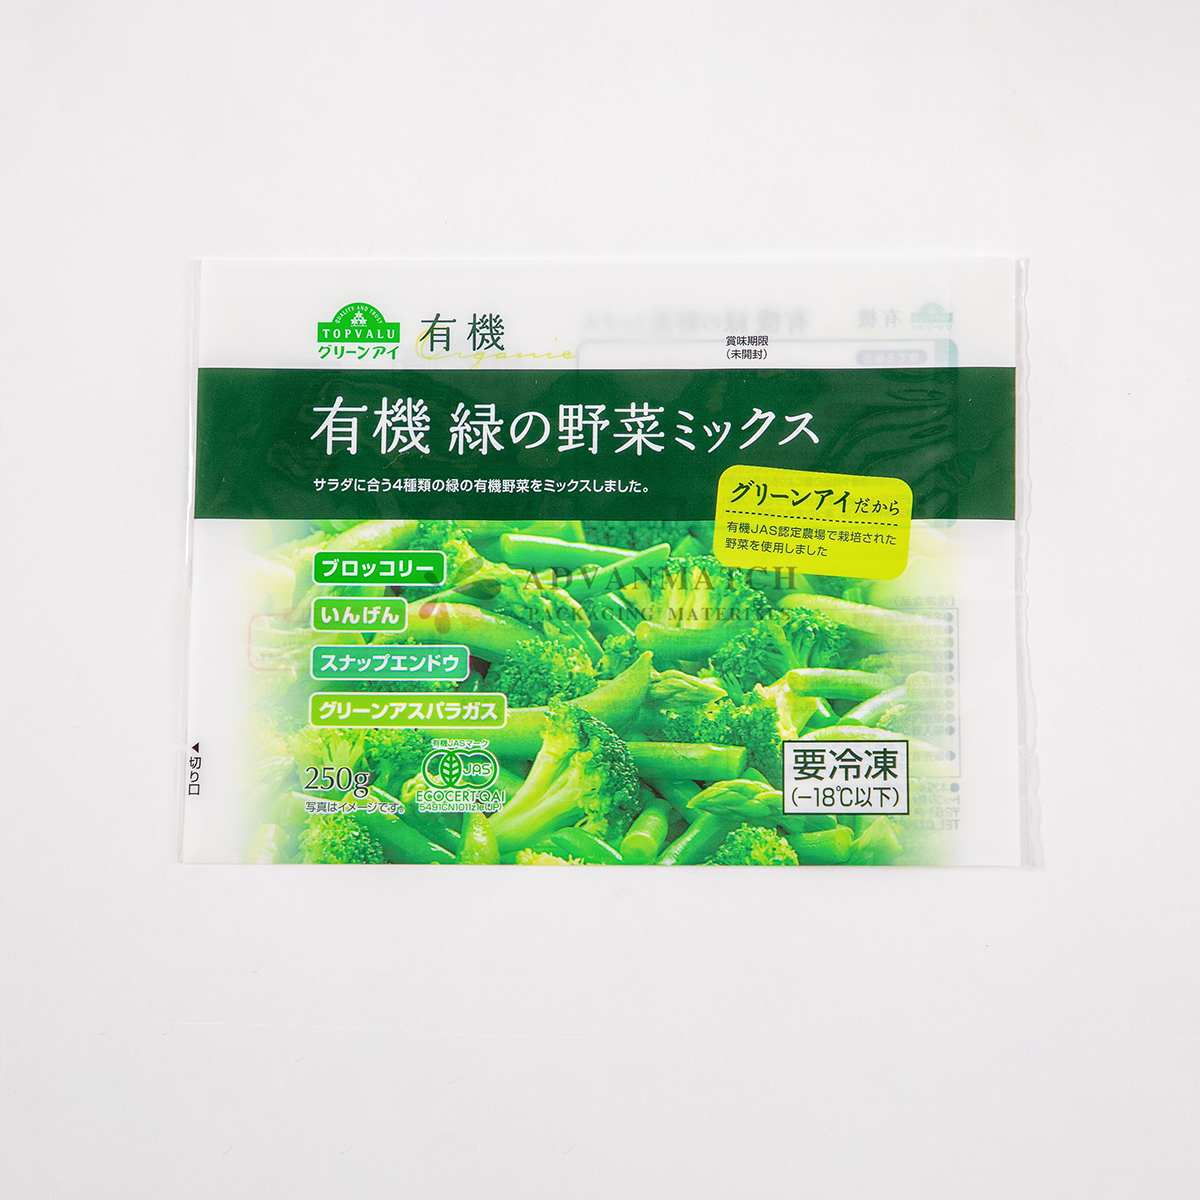 Microwavable pouch Featured Image